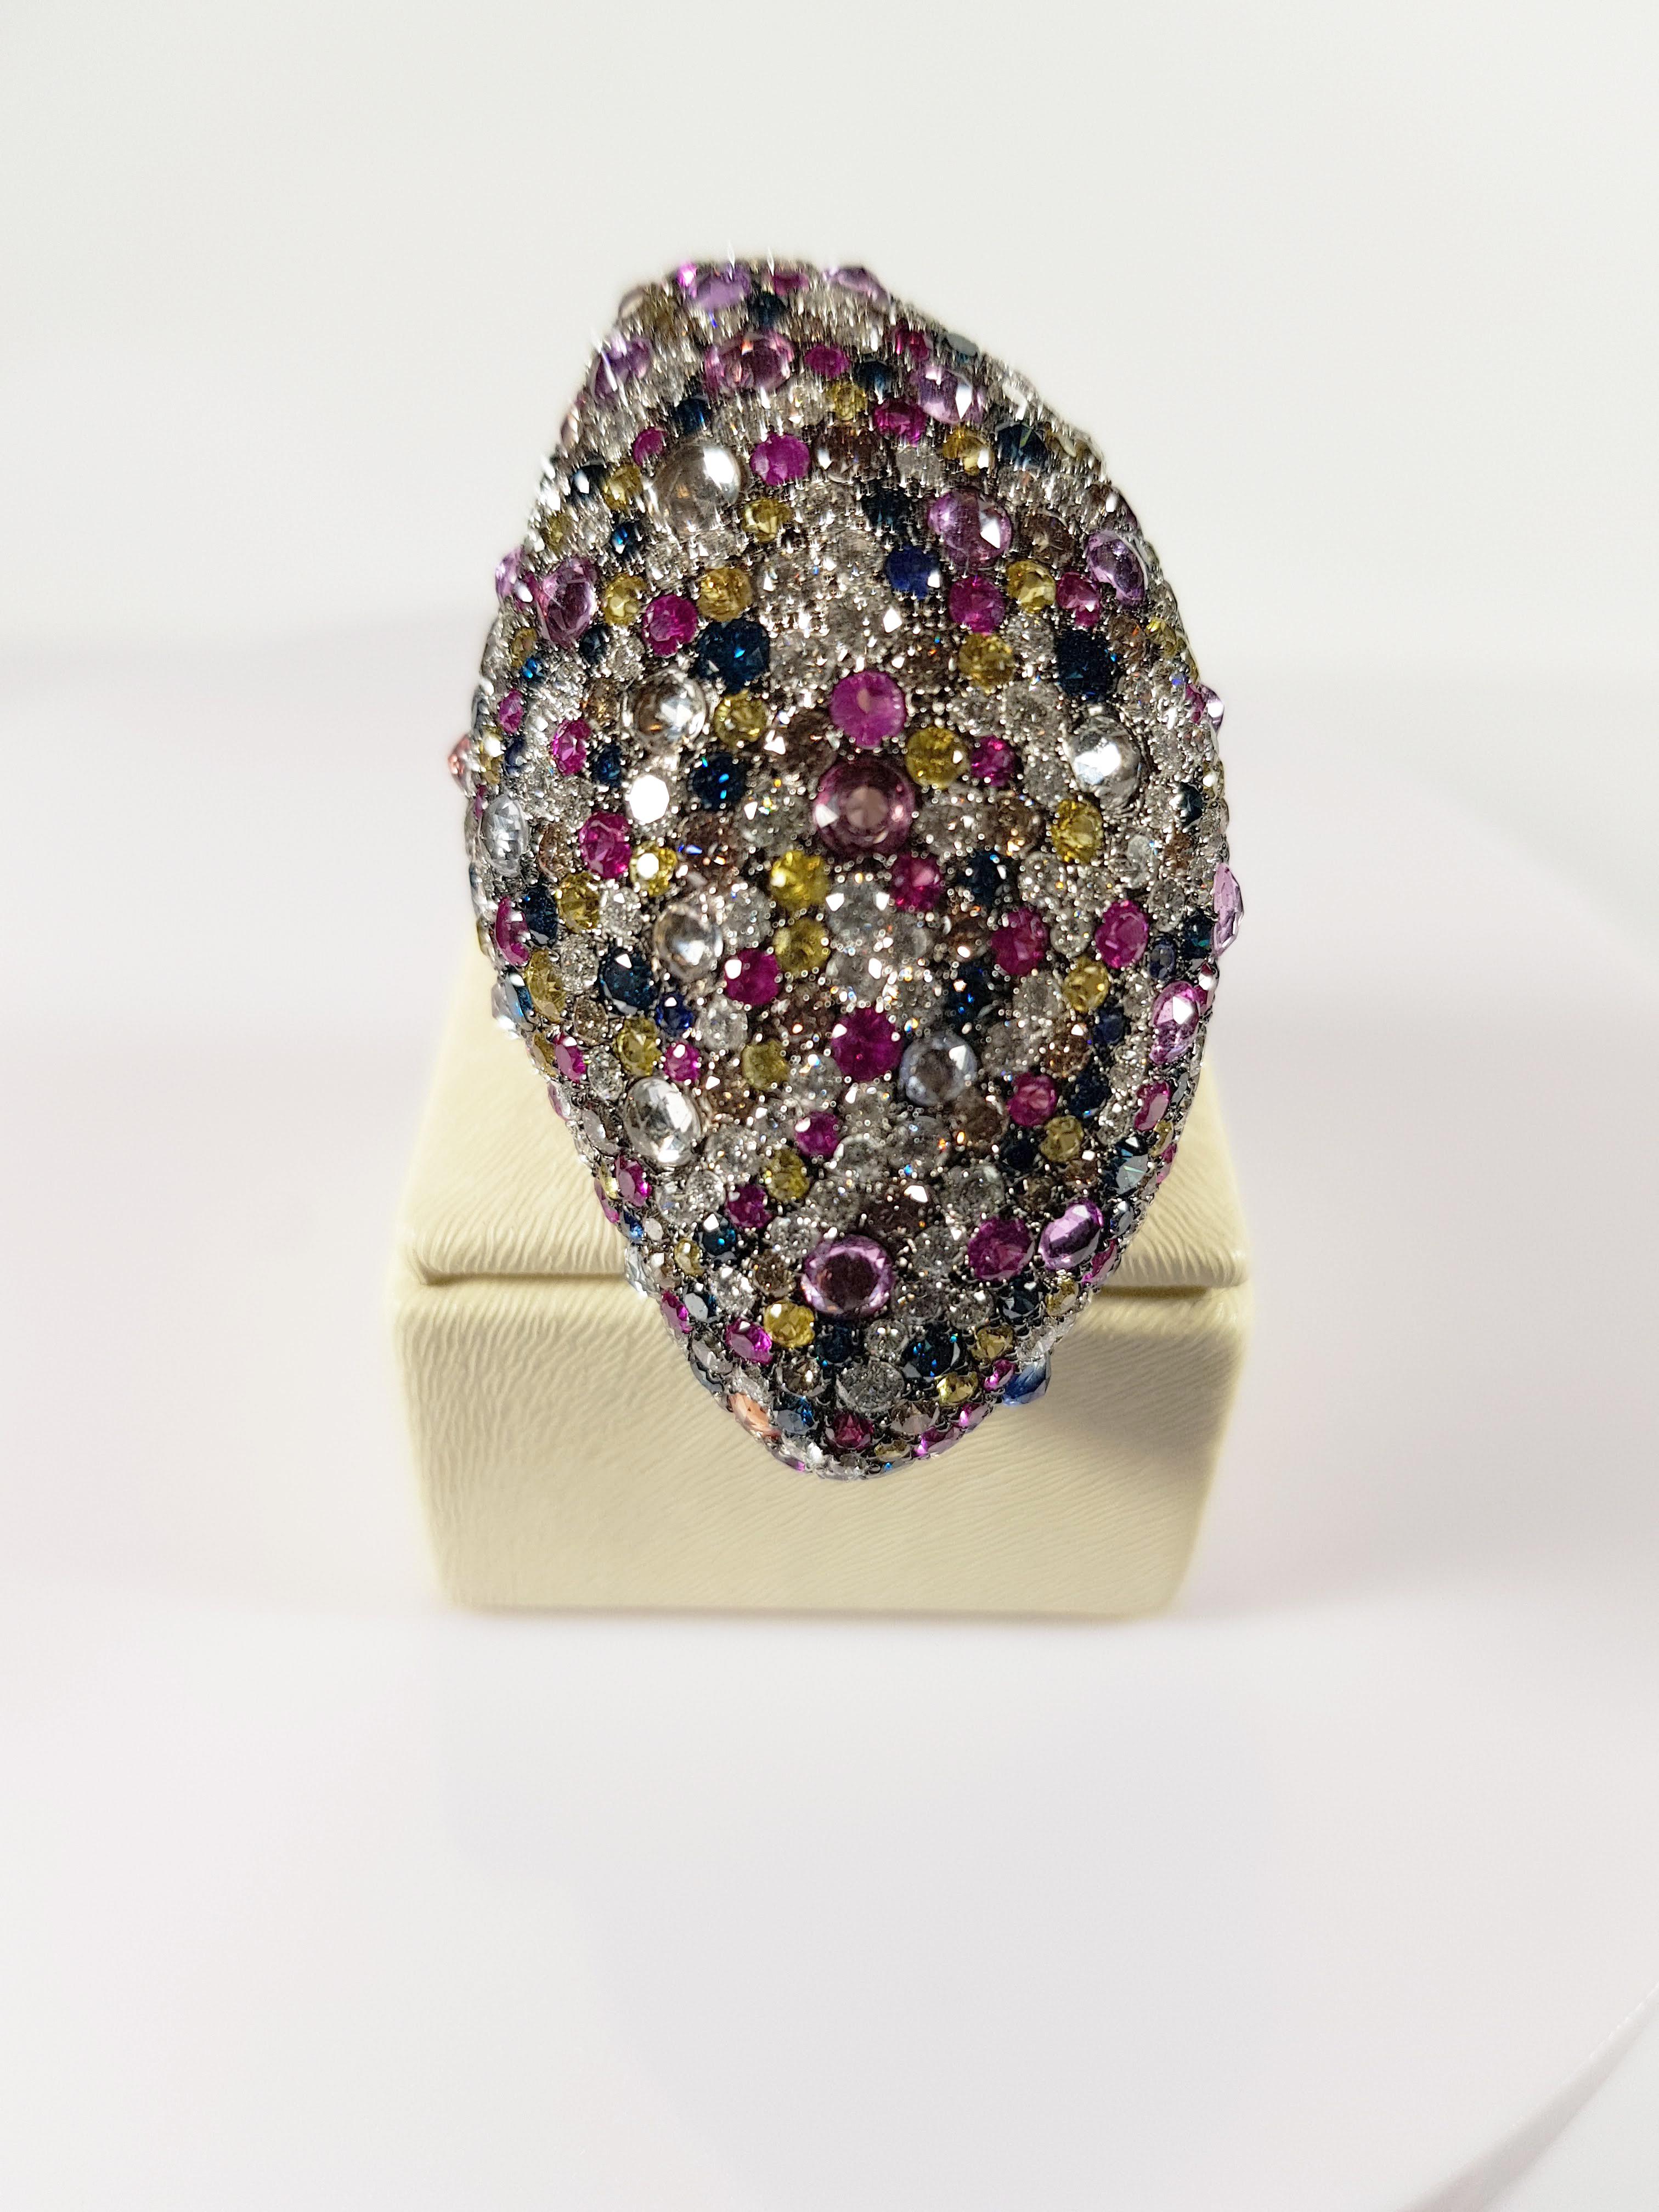 Irama Pradera is a Young designer from Spain that searches always for the best gems and combines classic with contemporary mounting and styles. 

MEASURES
◘ Gold Weight 18.22 gr.
◘ Sapphire 467 units aprox 6.01 ct.
◘ Diamonds 229 units aprox 5.86